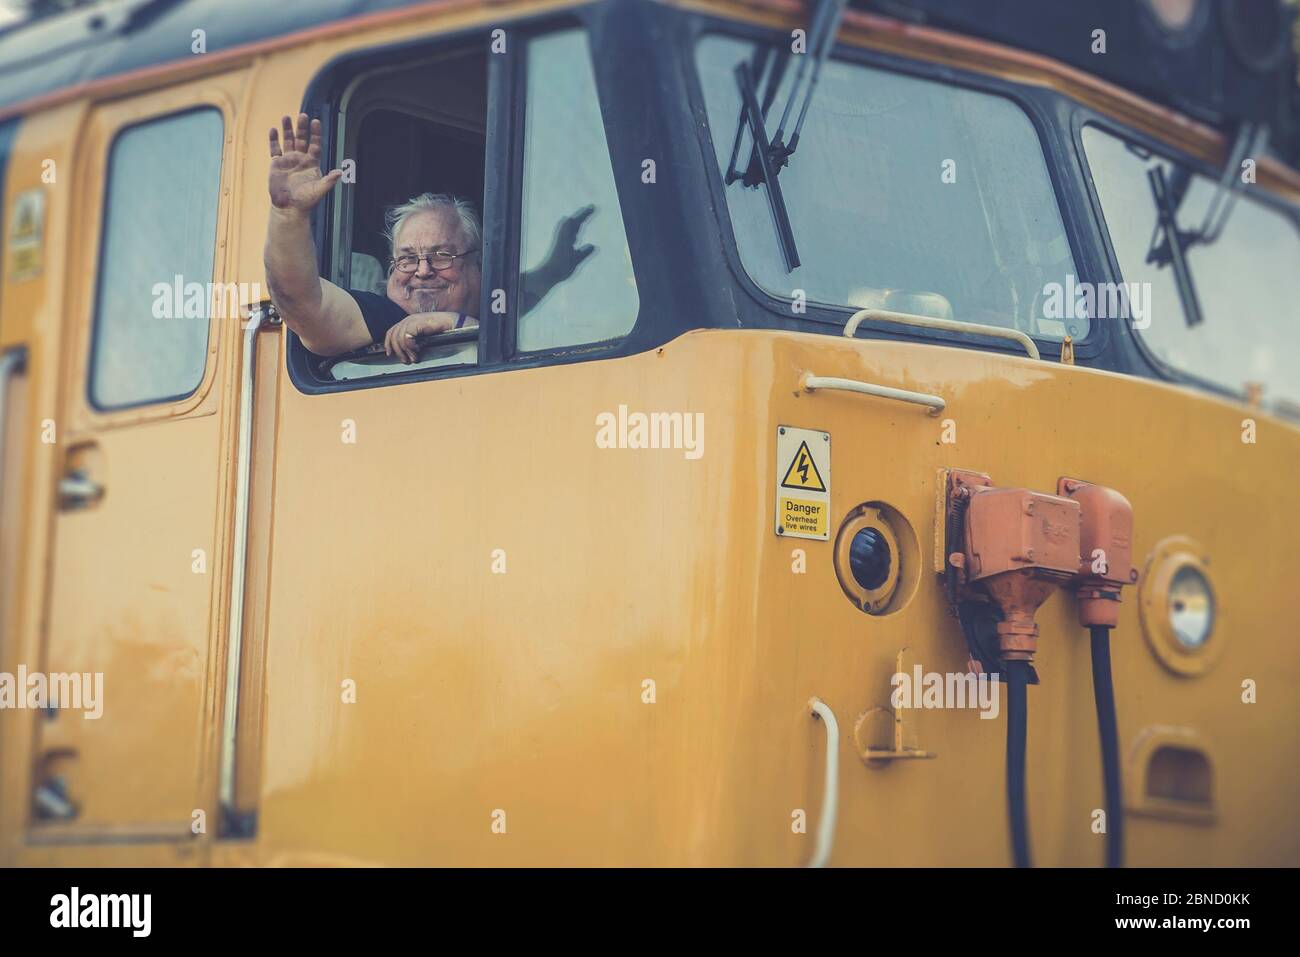 Retro front view close up, British vintage diesel locomotive leaving station, Severn Valley heritage railway, UK. Train driver waving from cab window. Stock Photo